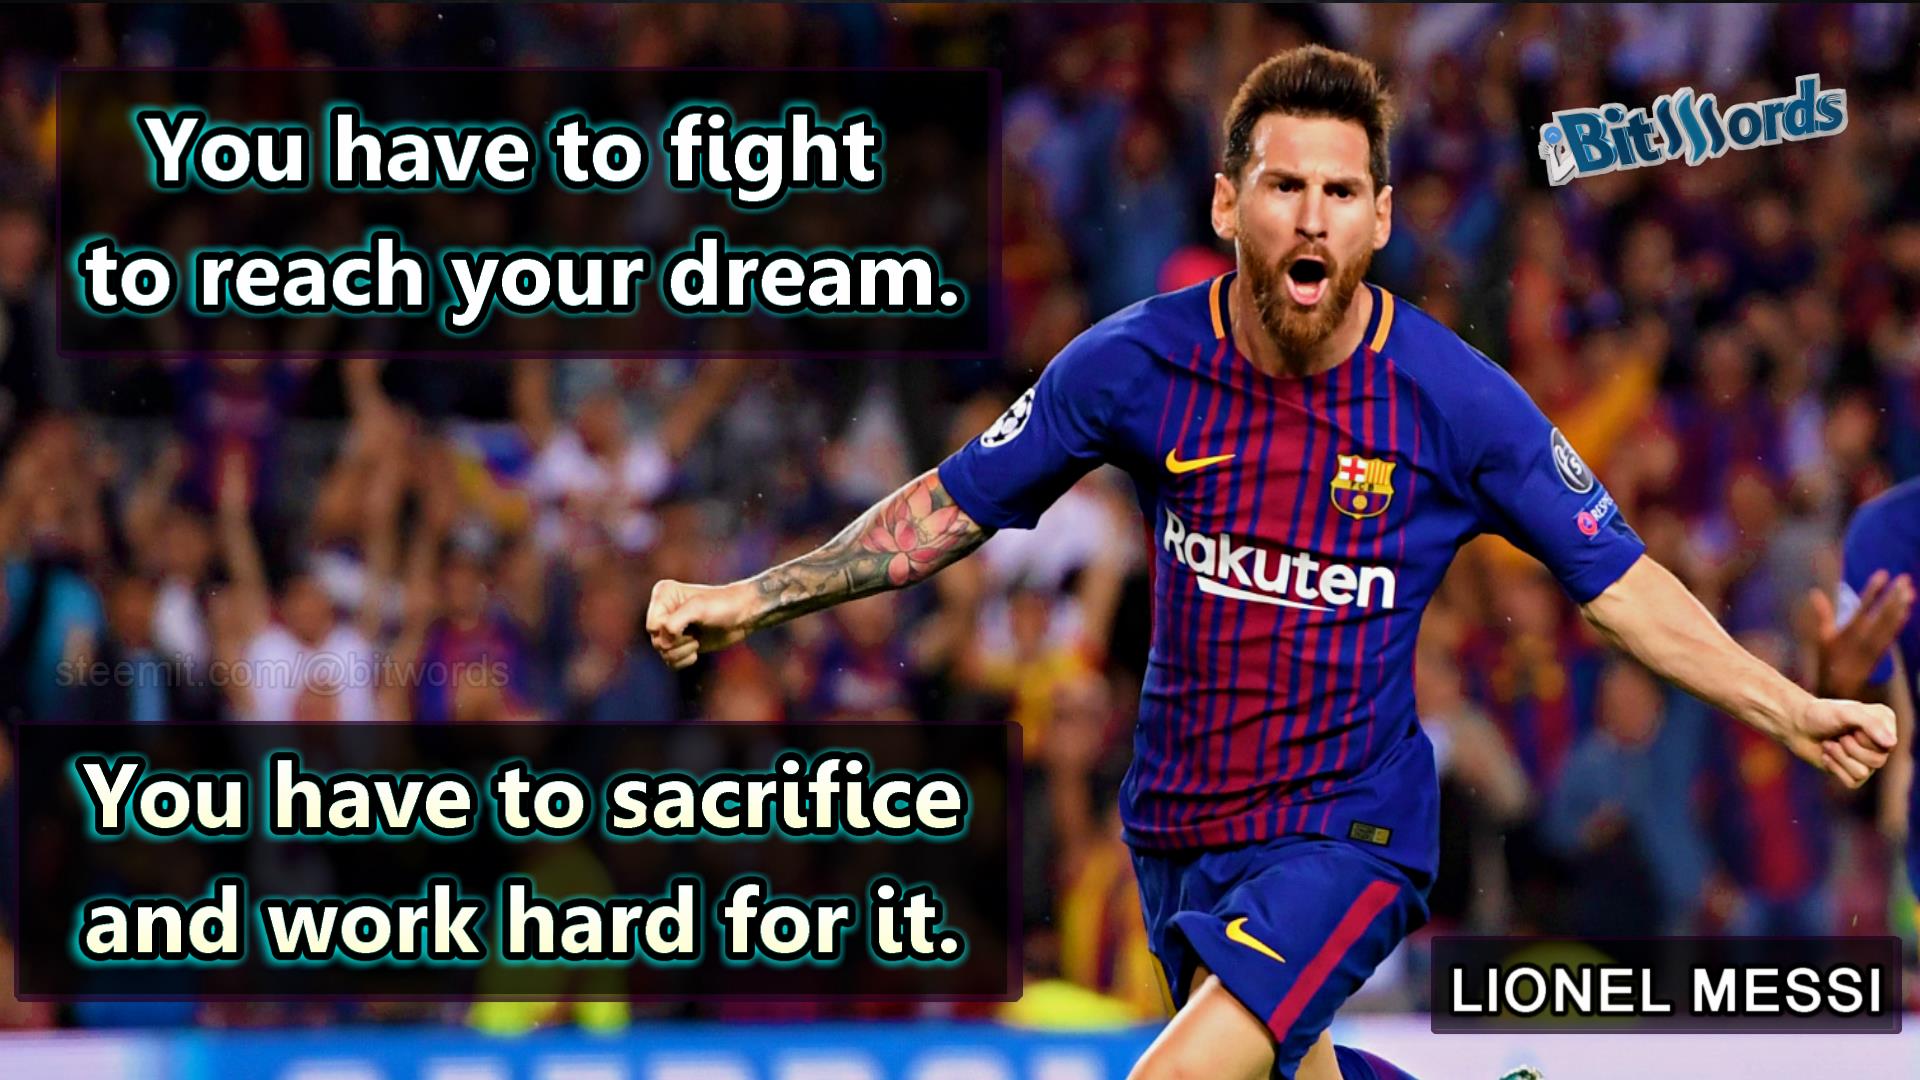 bitwords steemit sport quote of the day you have to fight to reach your dream you have to sacrifice and work hard for it lionel messi.jpg